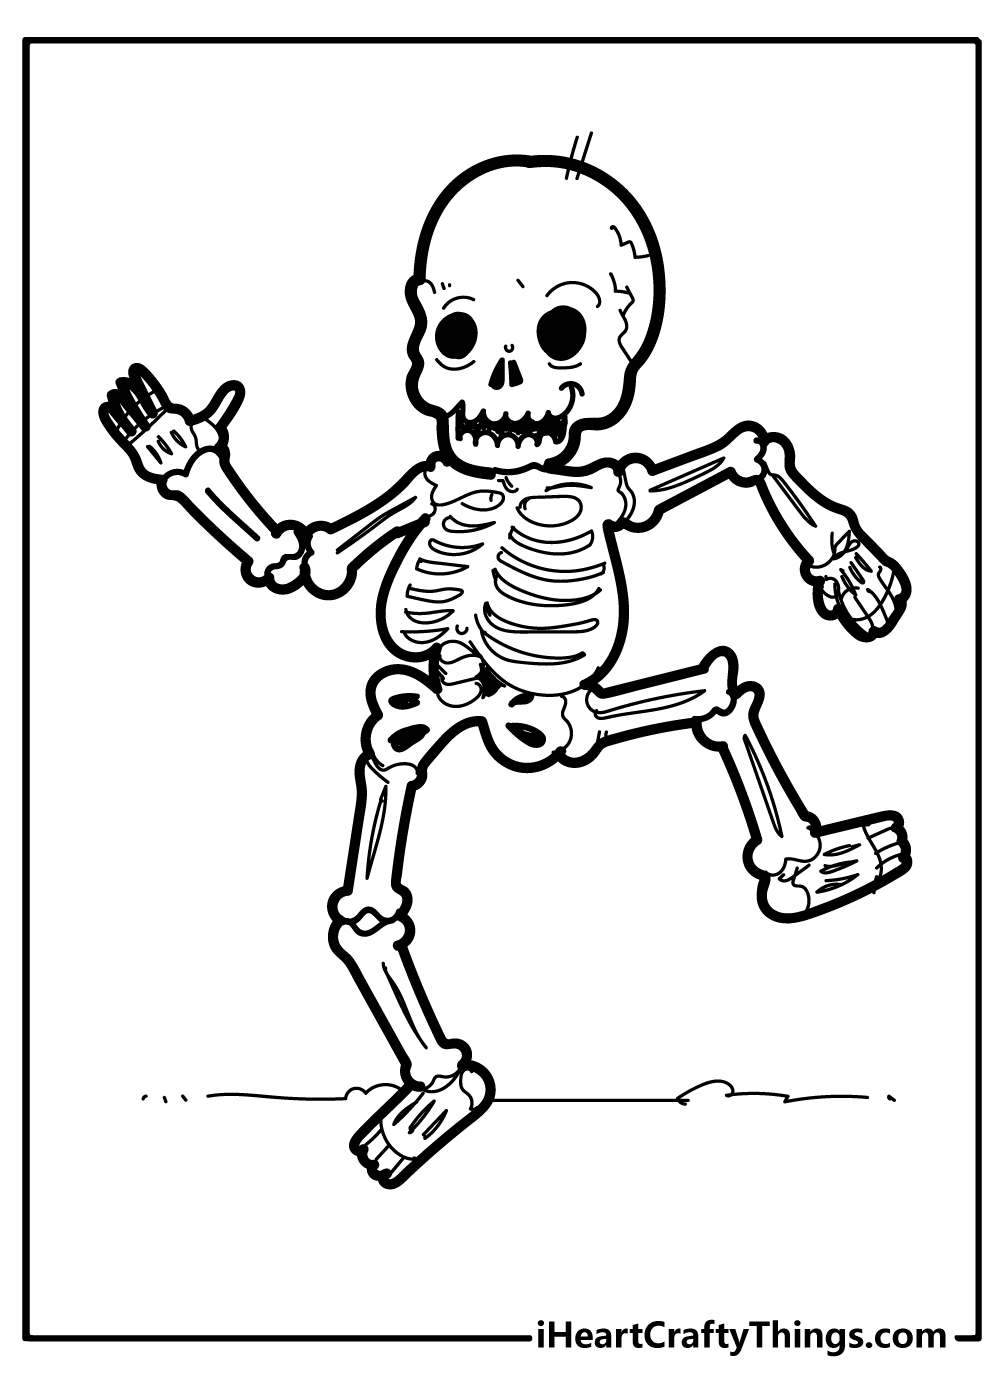 Printable Skeleton Coloring Pages Updated 20